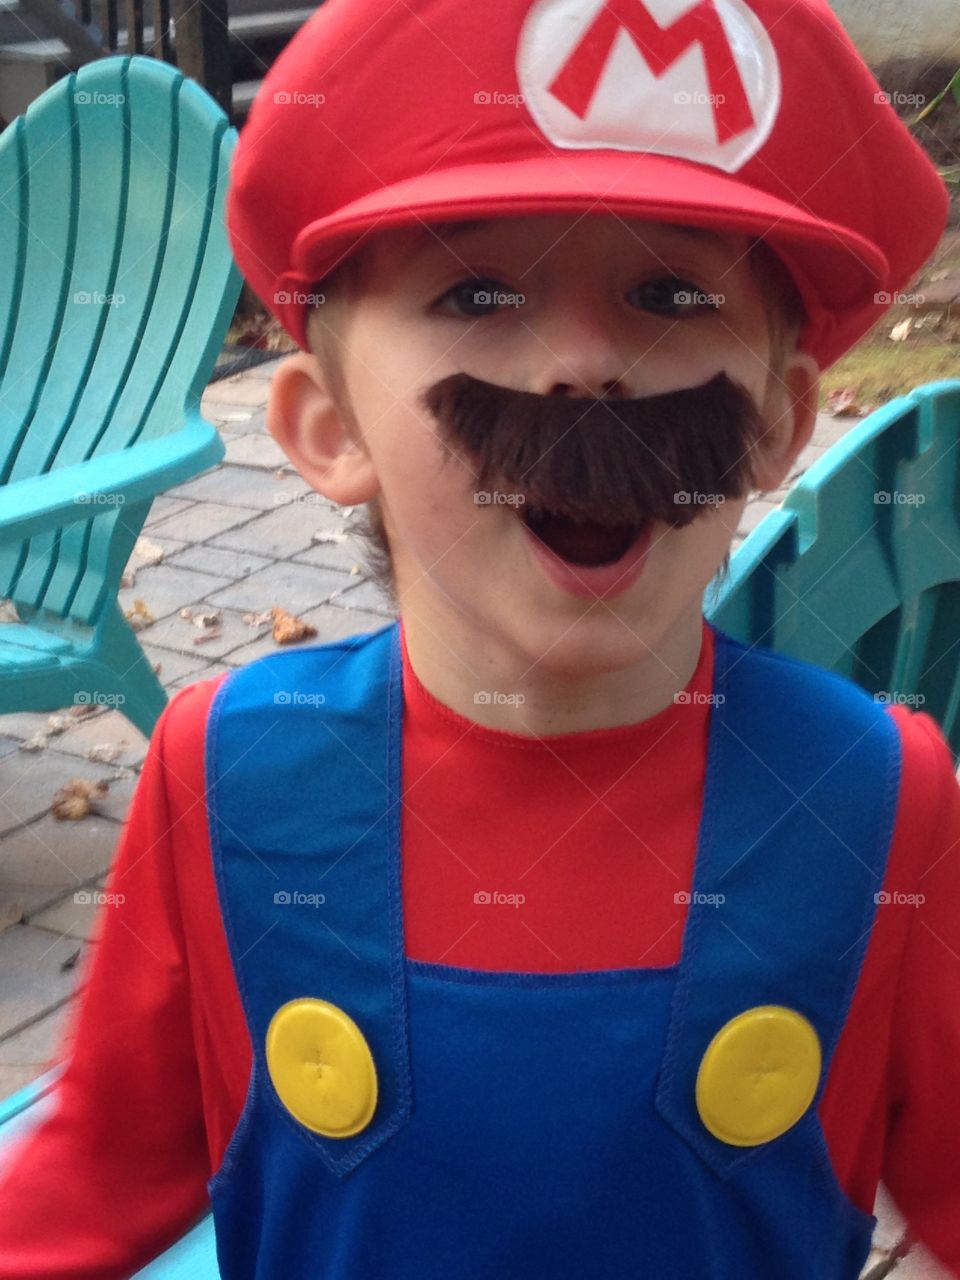 The Real Mario